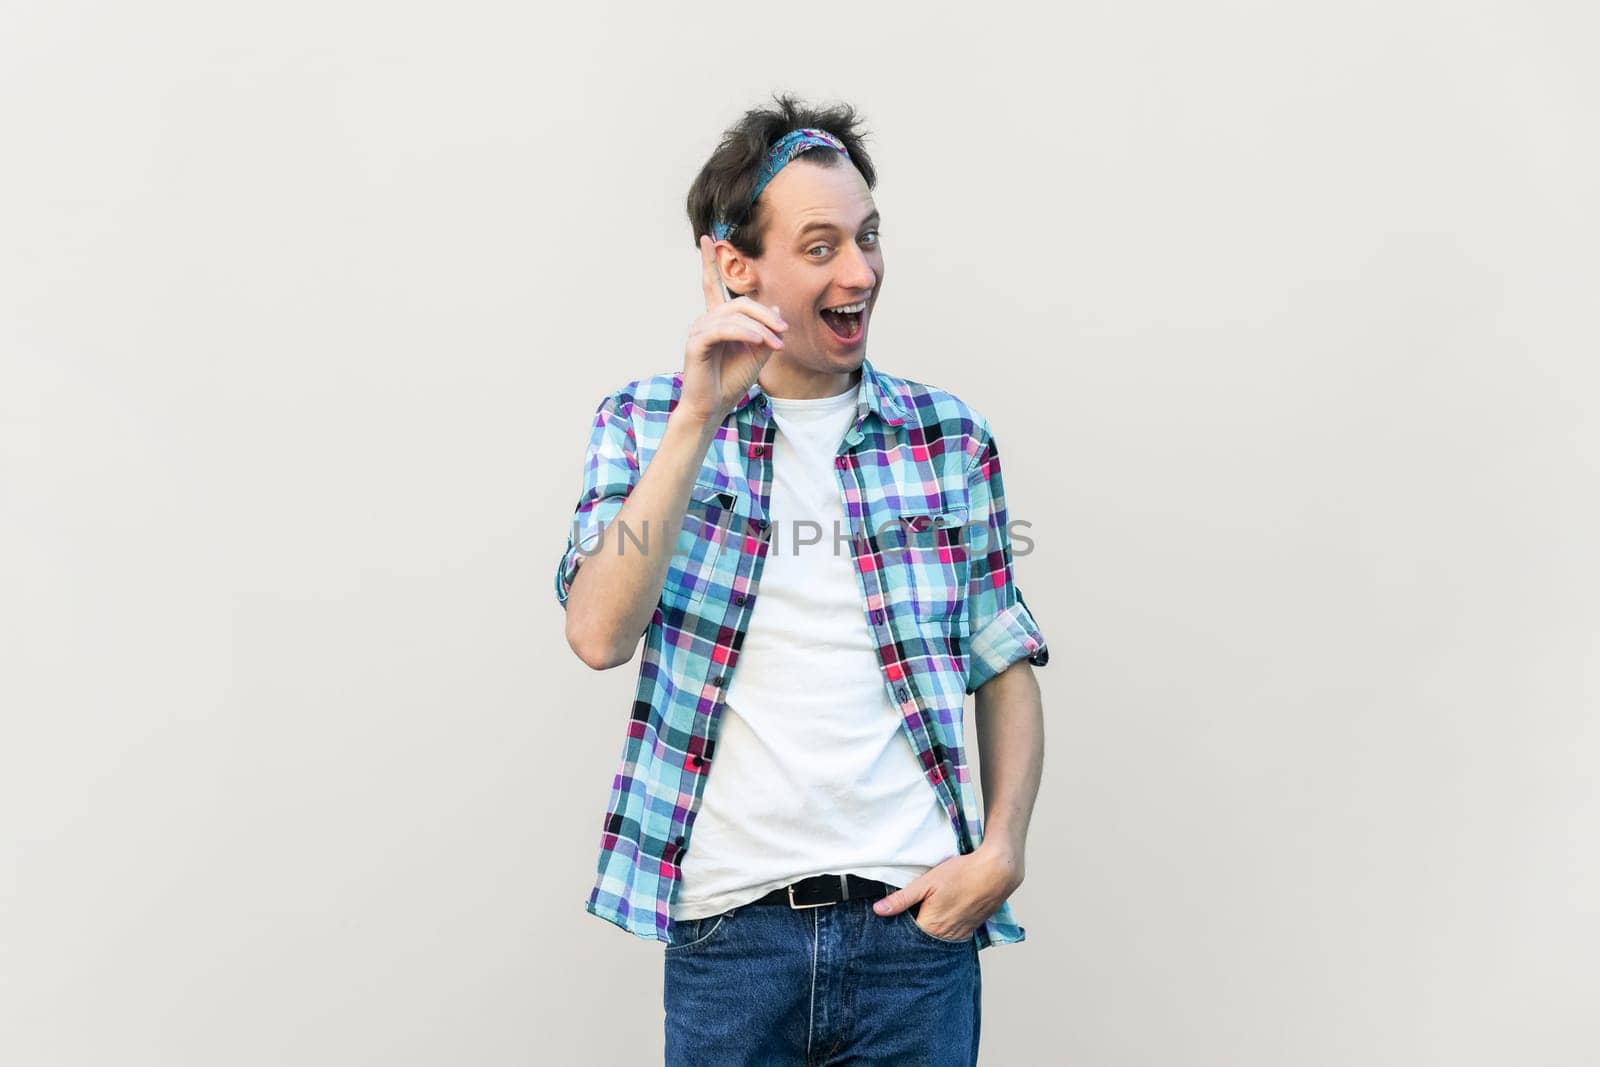 Optimistic glad excited man makes gesture with fore finger upwards, having great idea, smiling, wearing blue checkered shirt and headband. Indoor studio shot isolated on gray background.